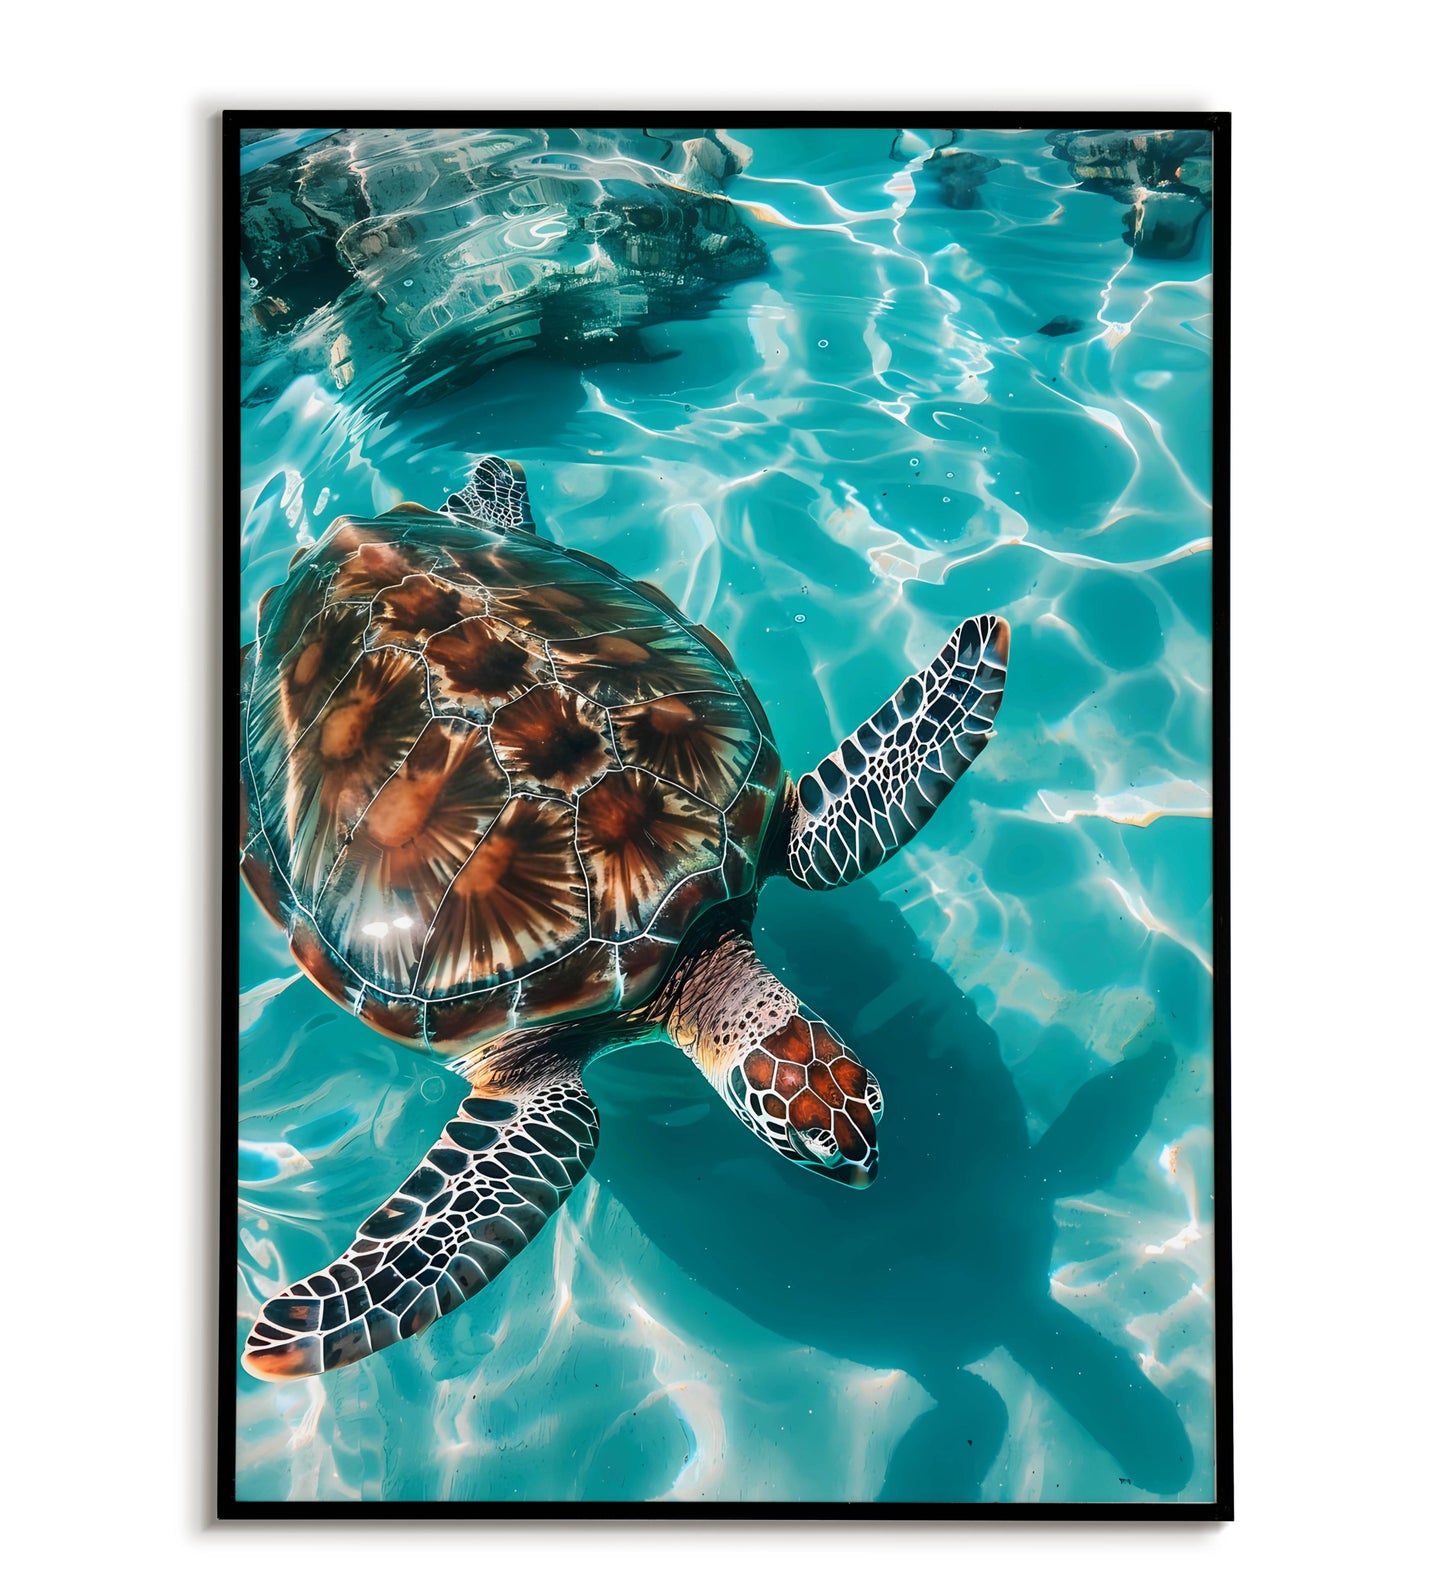 Turtle's Lagoon Glide printable poster. Available for purchase as a physical poster or digital download.